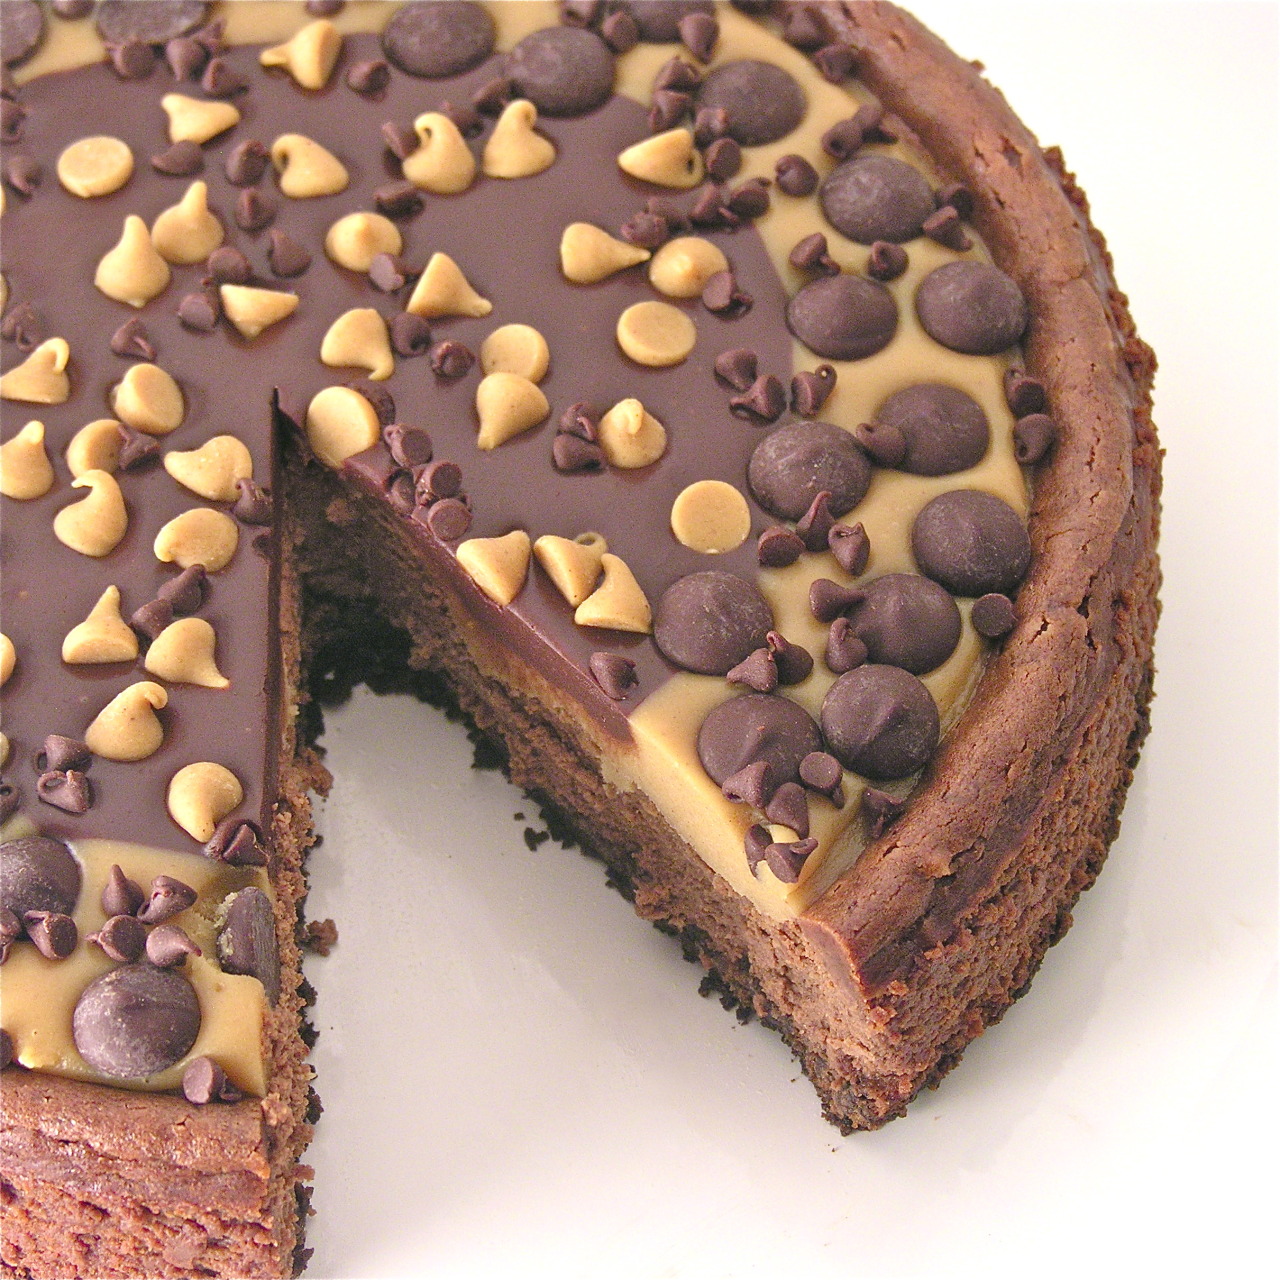 Peanut Butter Cup Cheesecake